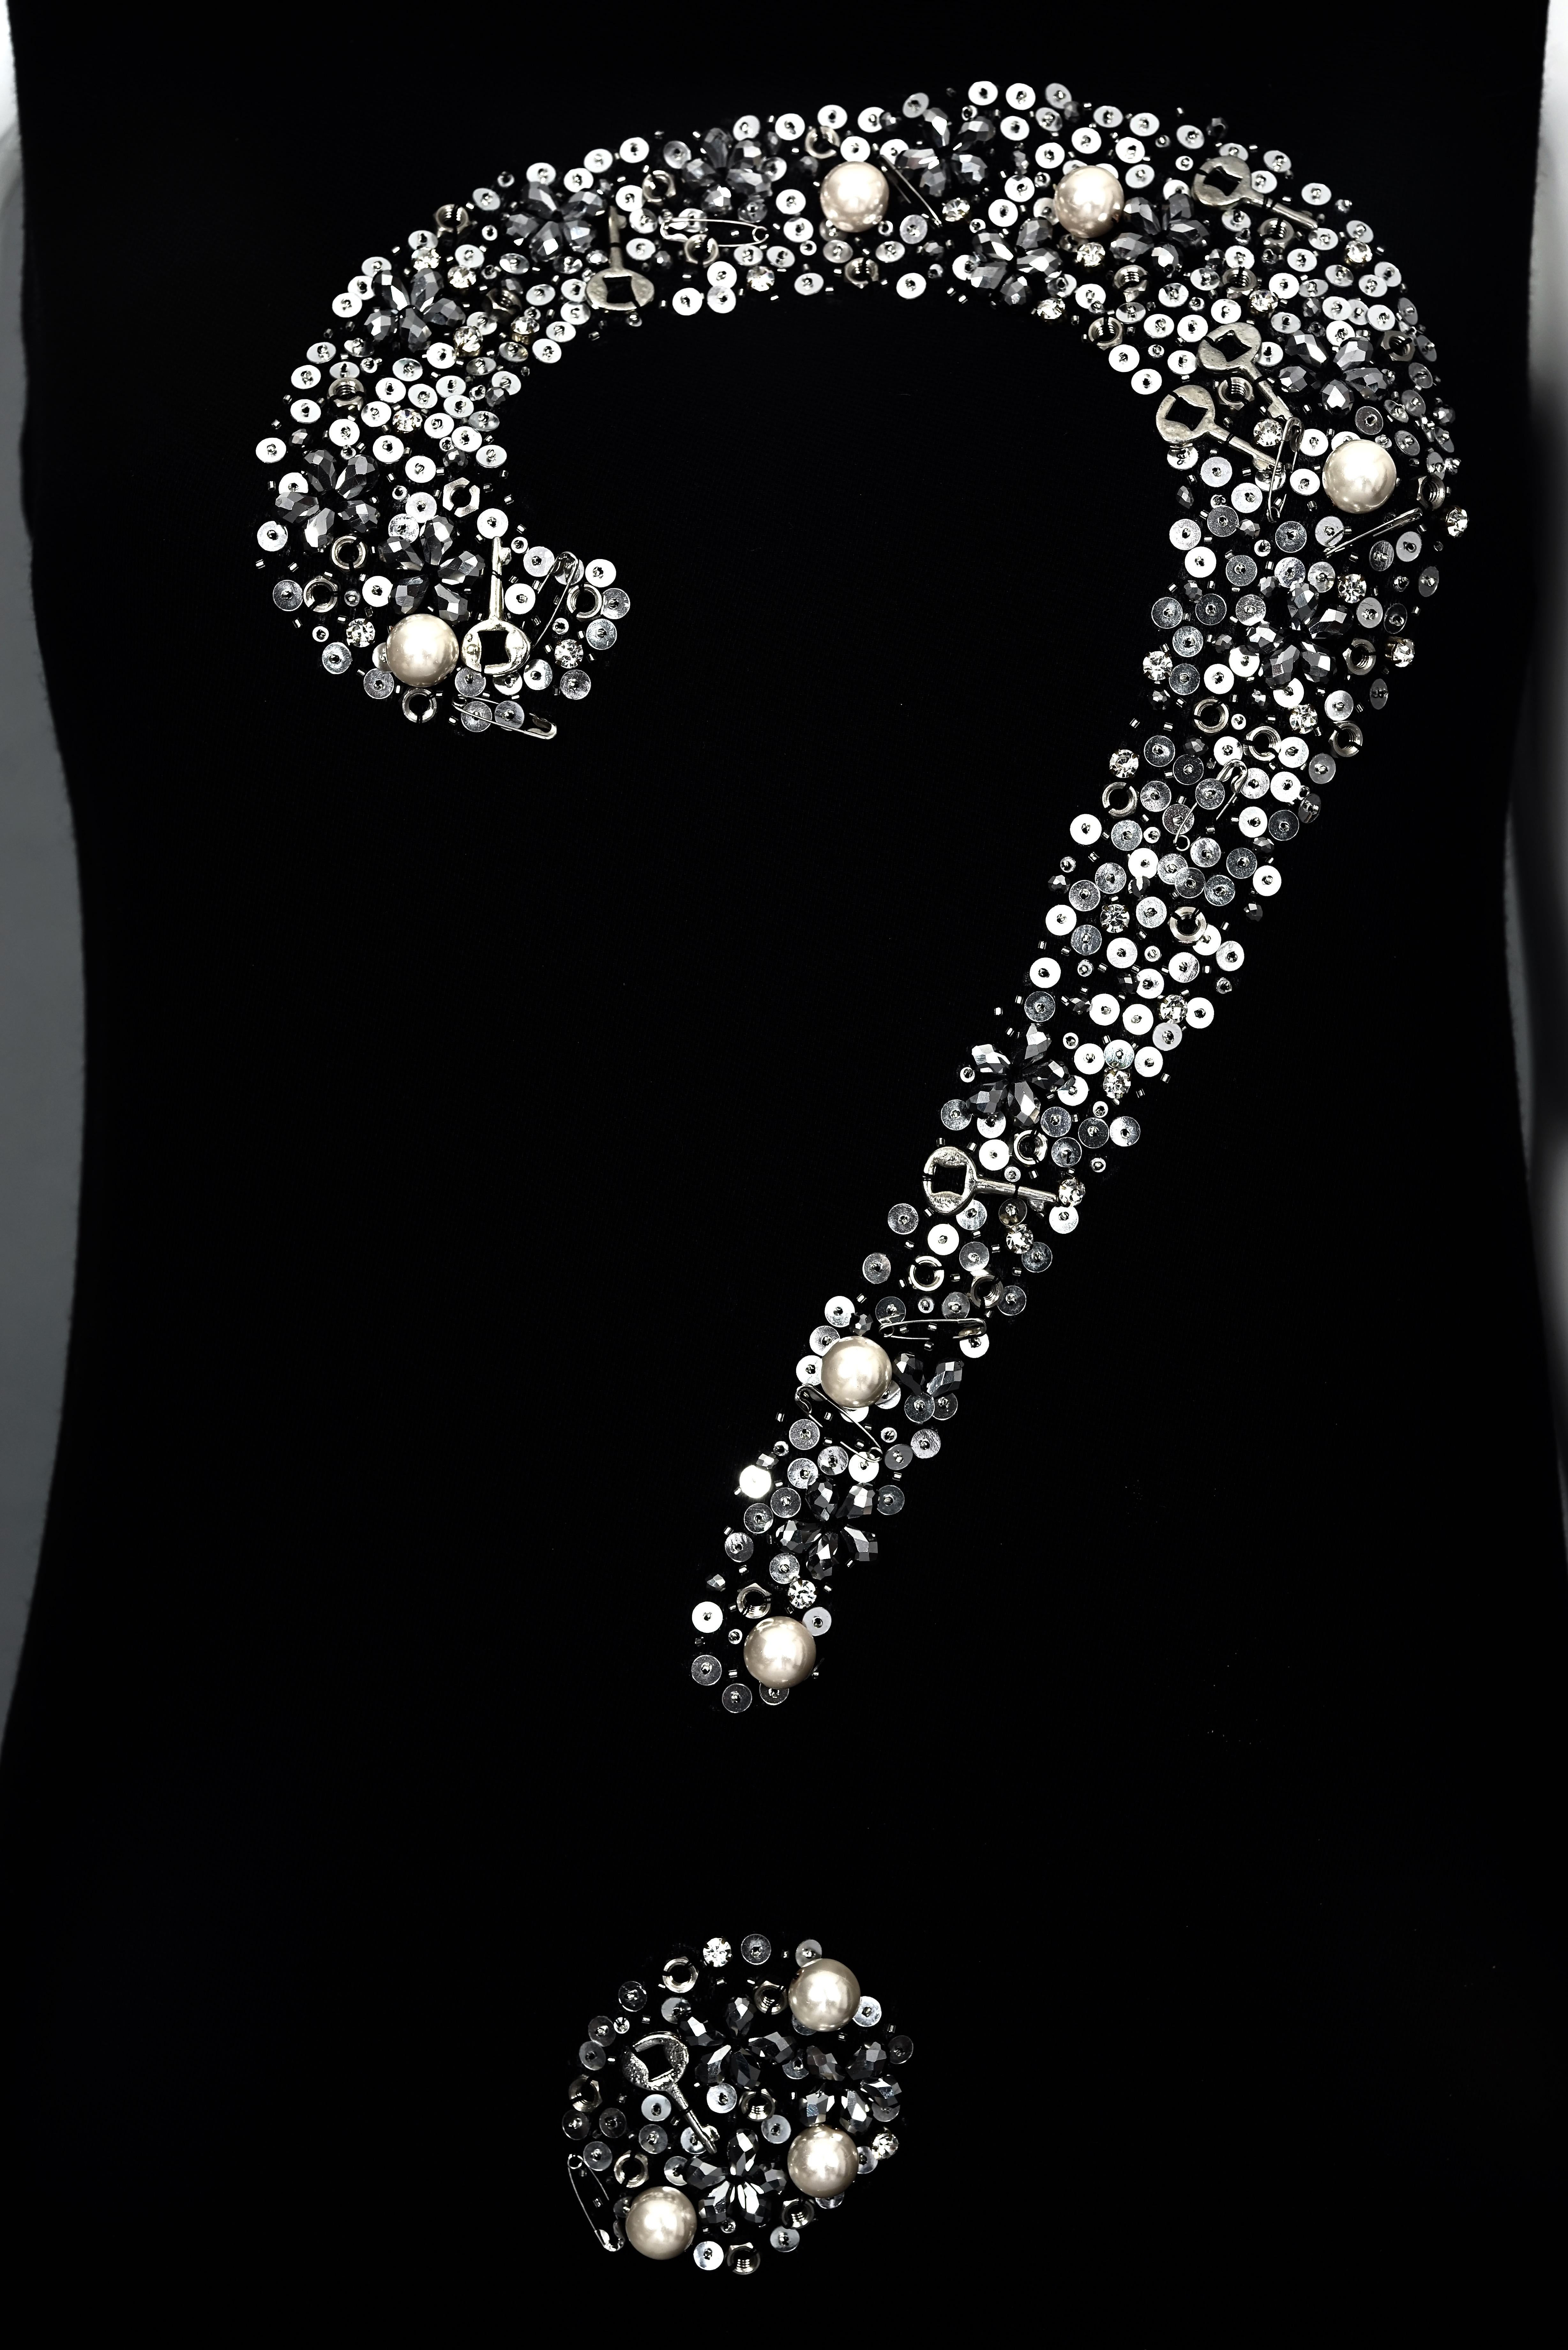 Black Iconic MOSCHINO Question Mark Embellished Dress